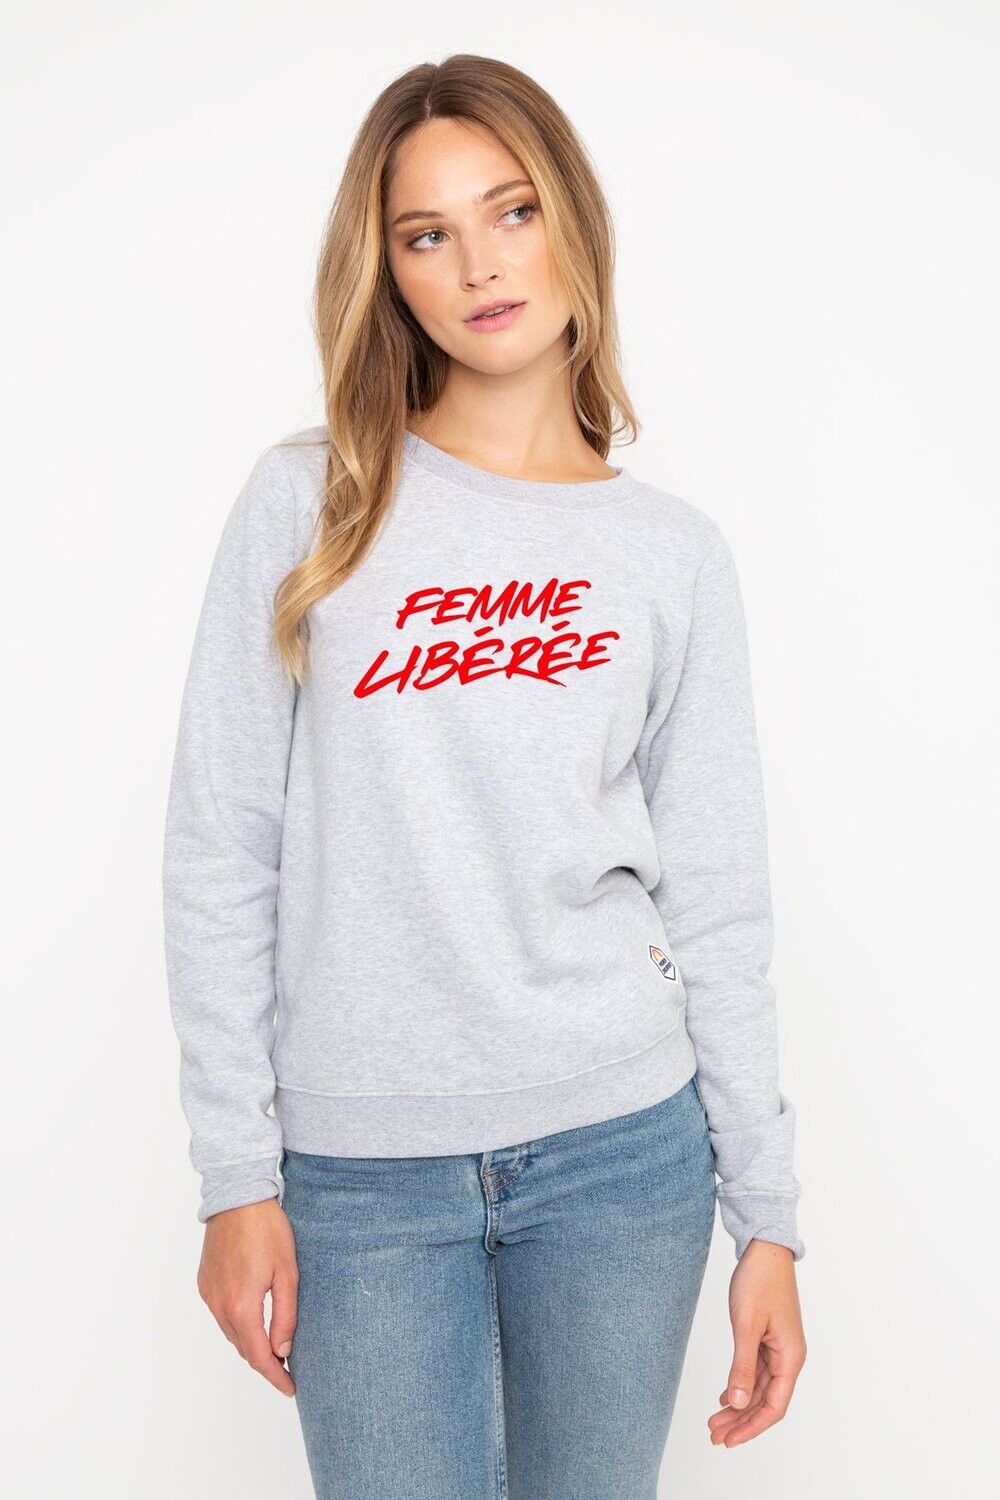 French Disorder Sweat Femme libéree heather grey